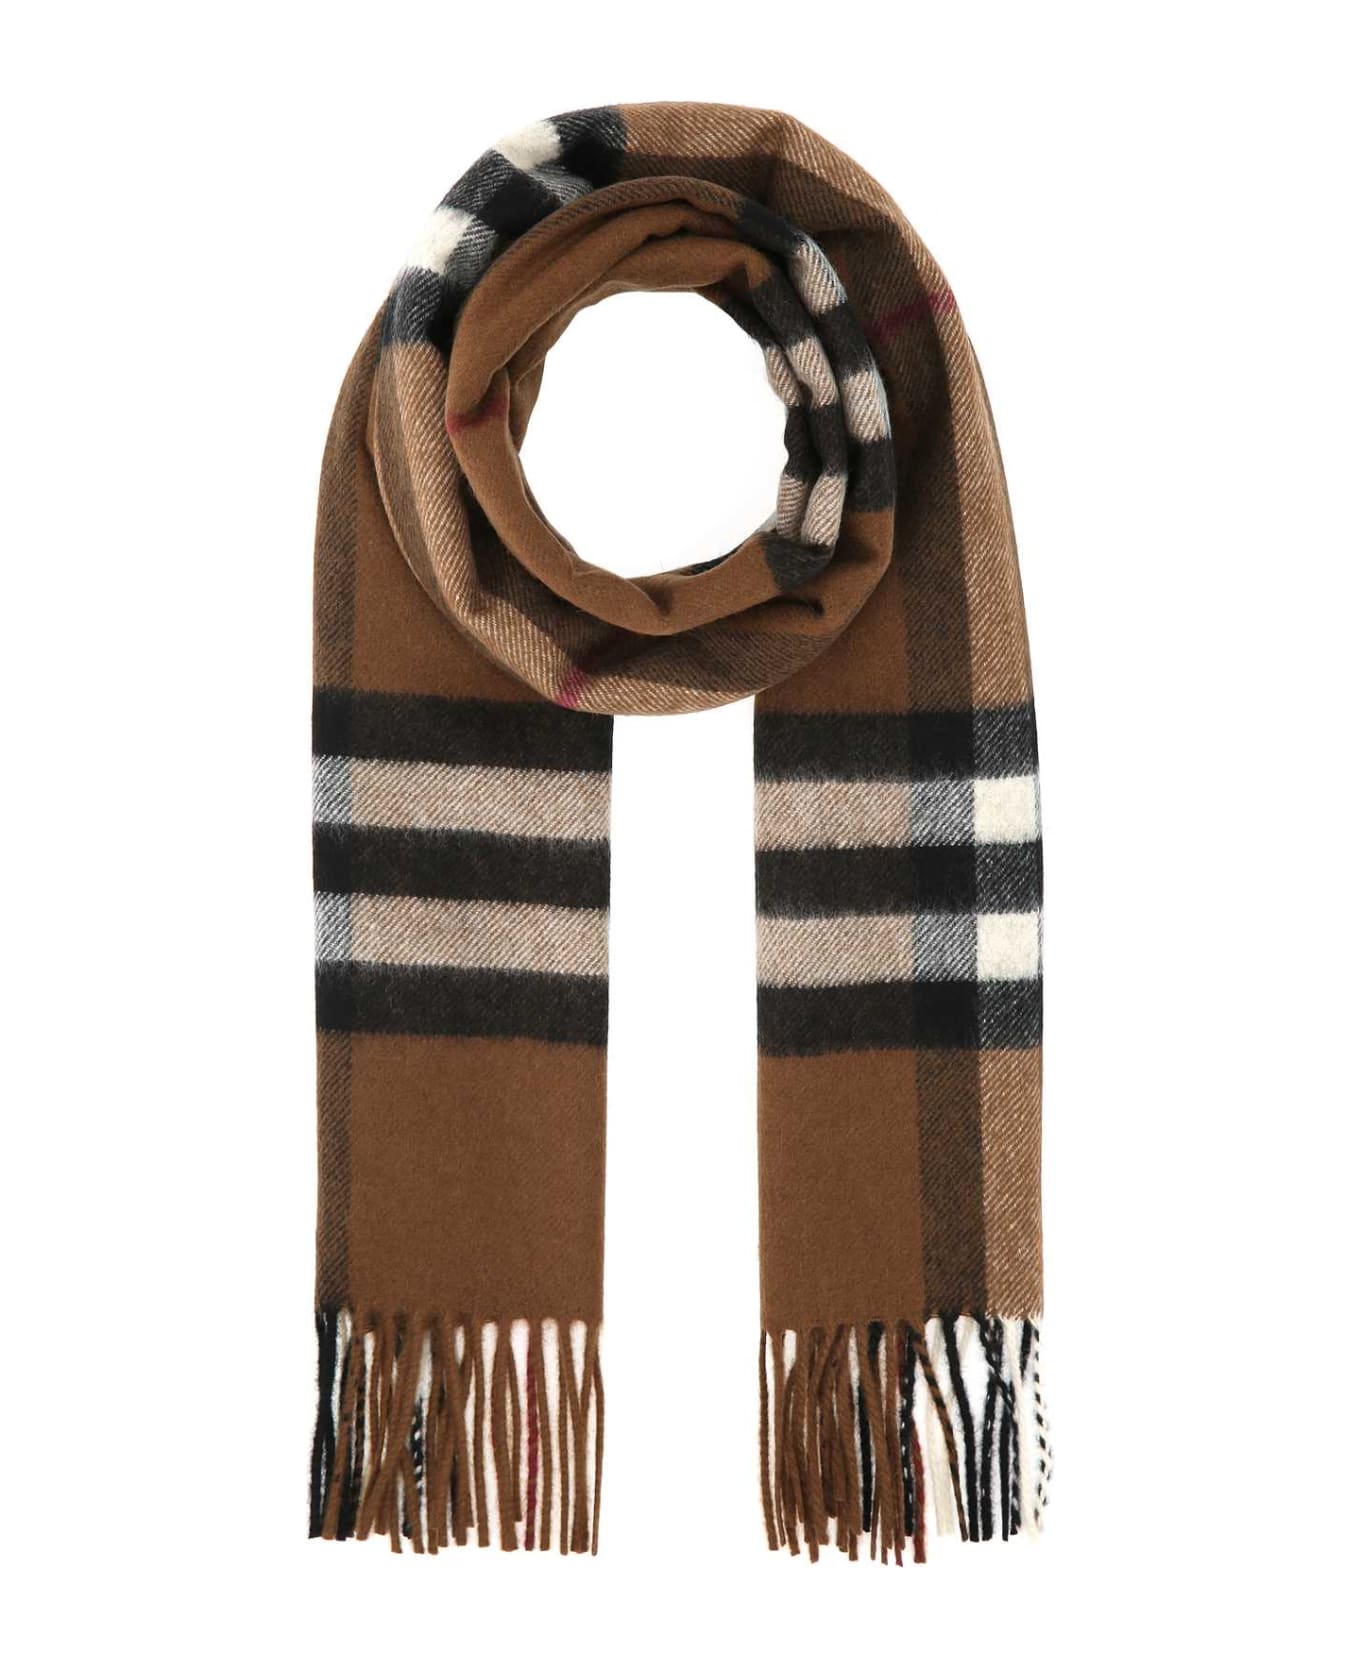 Burberry Embroidered Cashmere Scarf - A8773